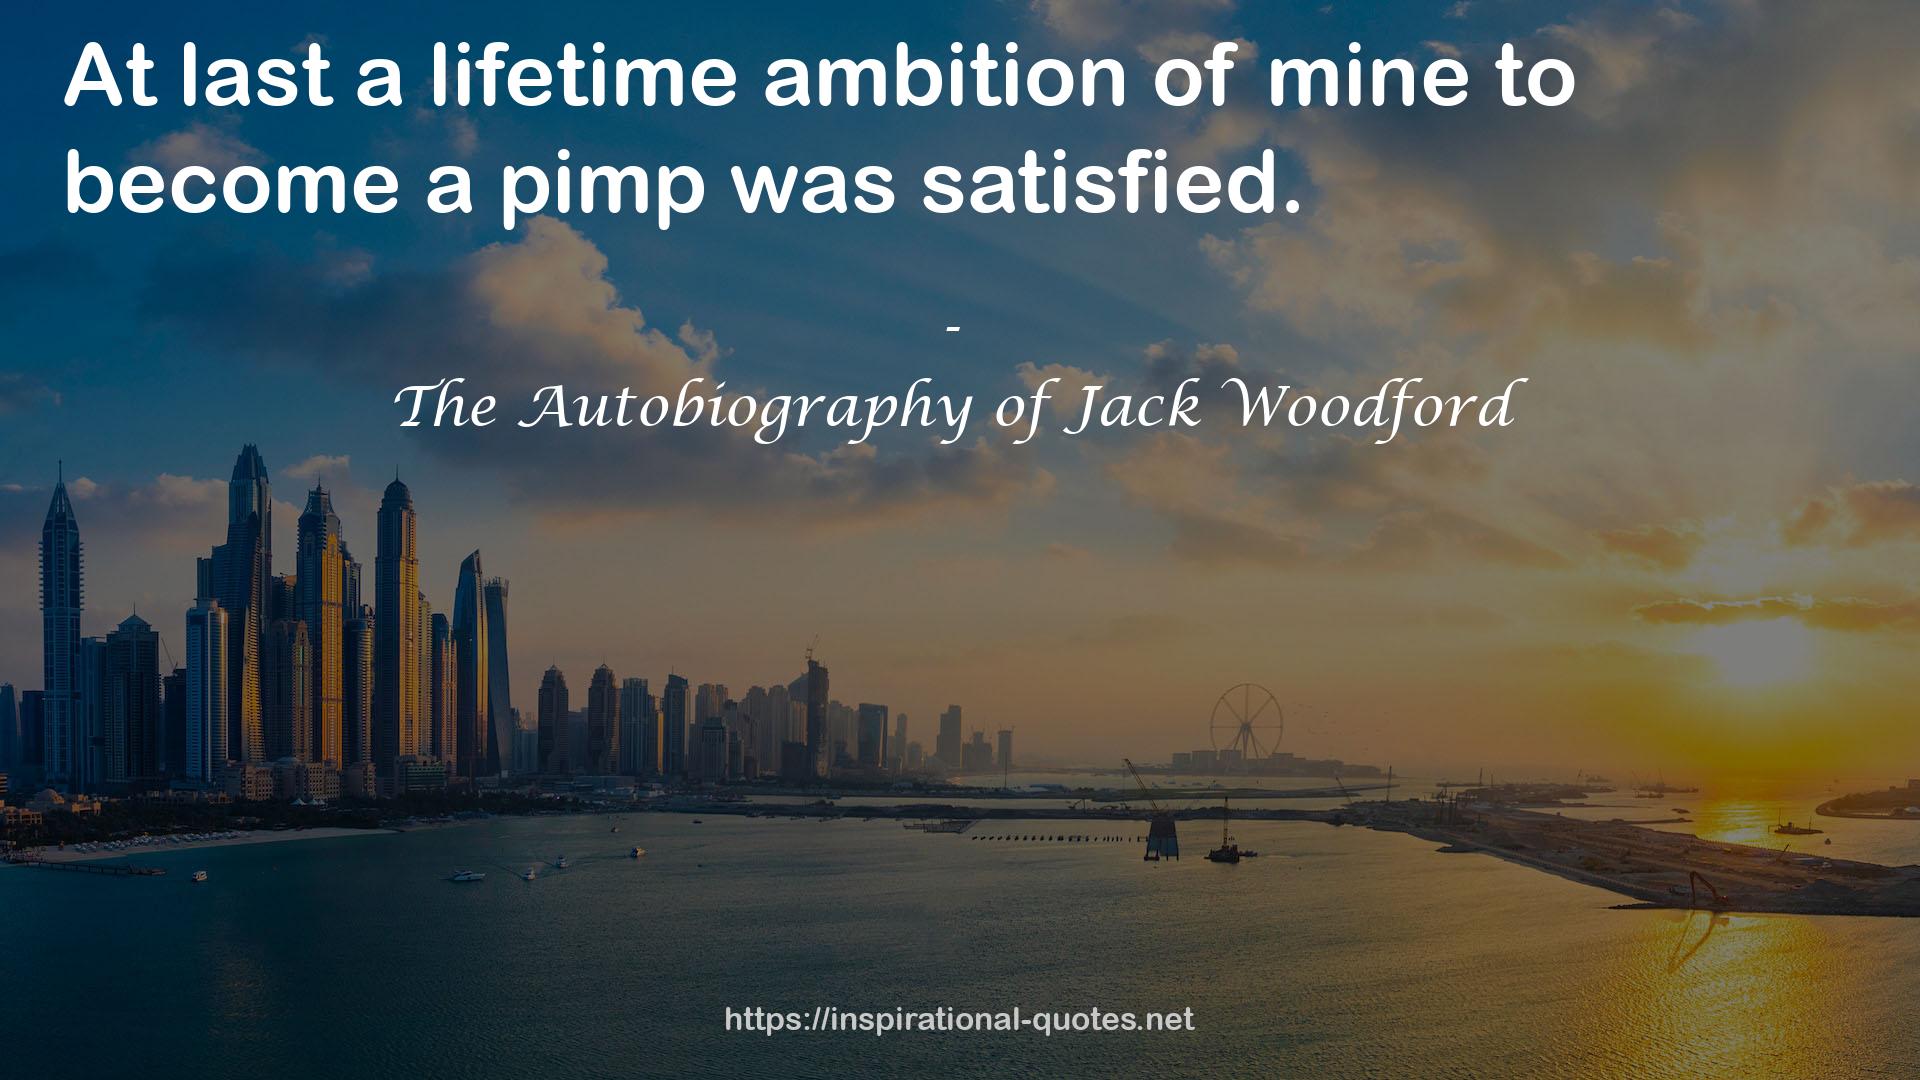 The Autobiography of Jack Woodford QUOTES